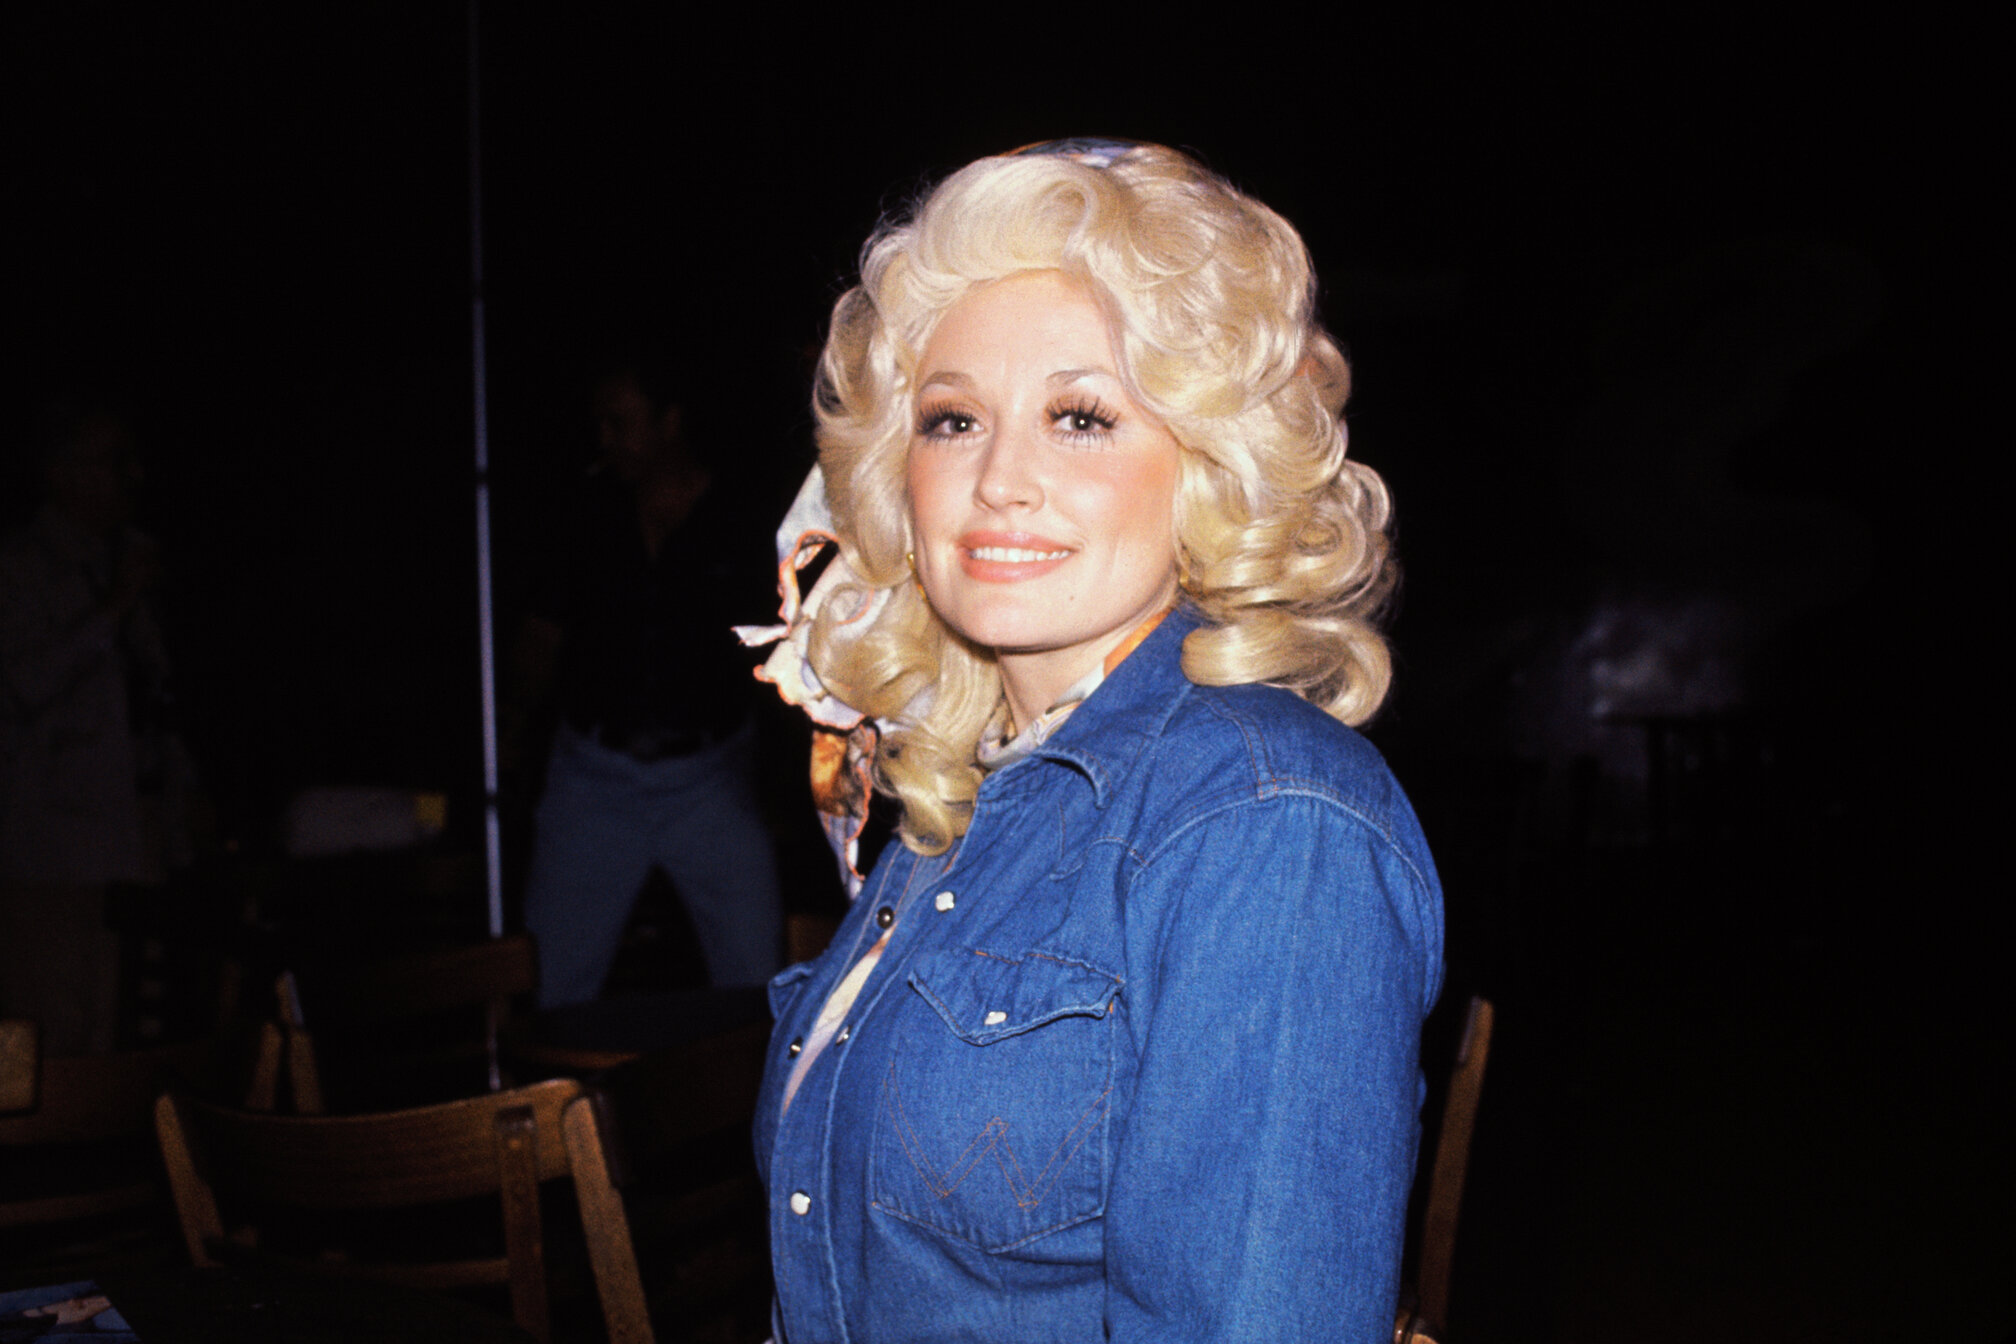 Dolly Parton in a jean shirt with big, curly blond hair.